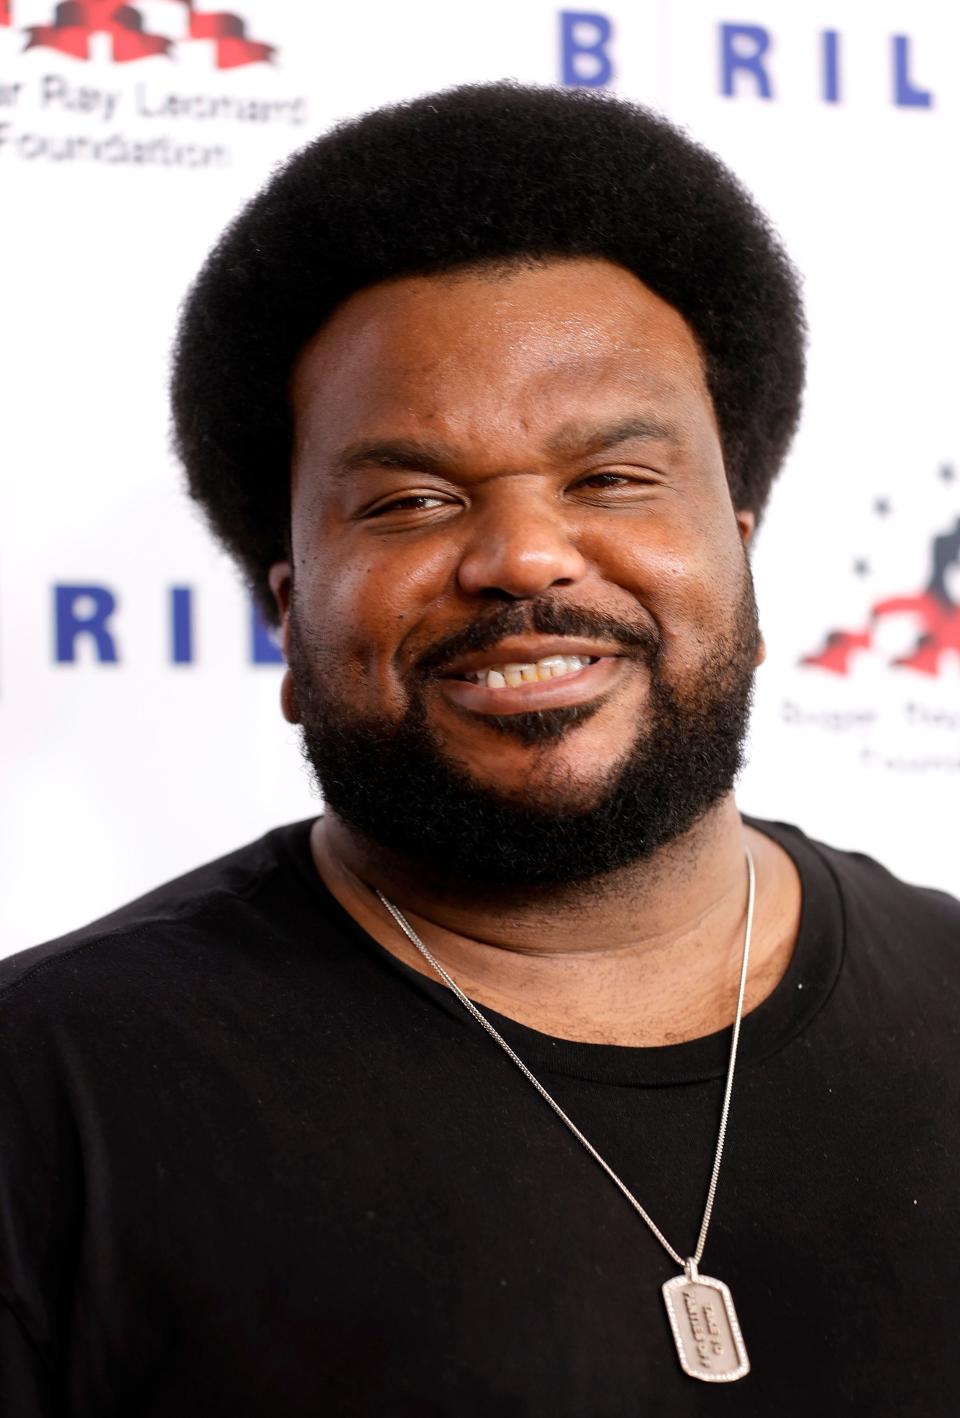 "The Office" alum Craig Robinson had to be evacuated from a comedy club amid an "active shooter" incident.